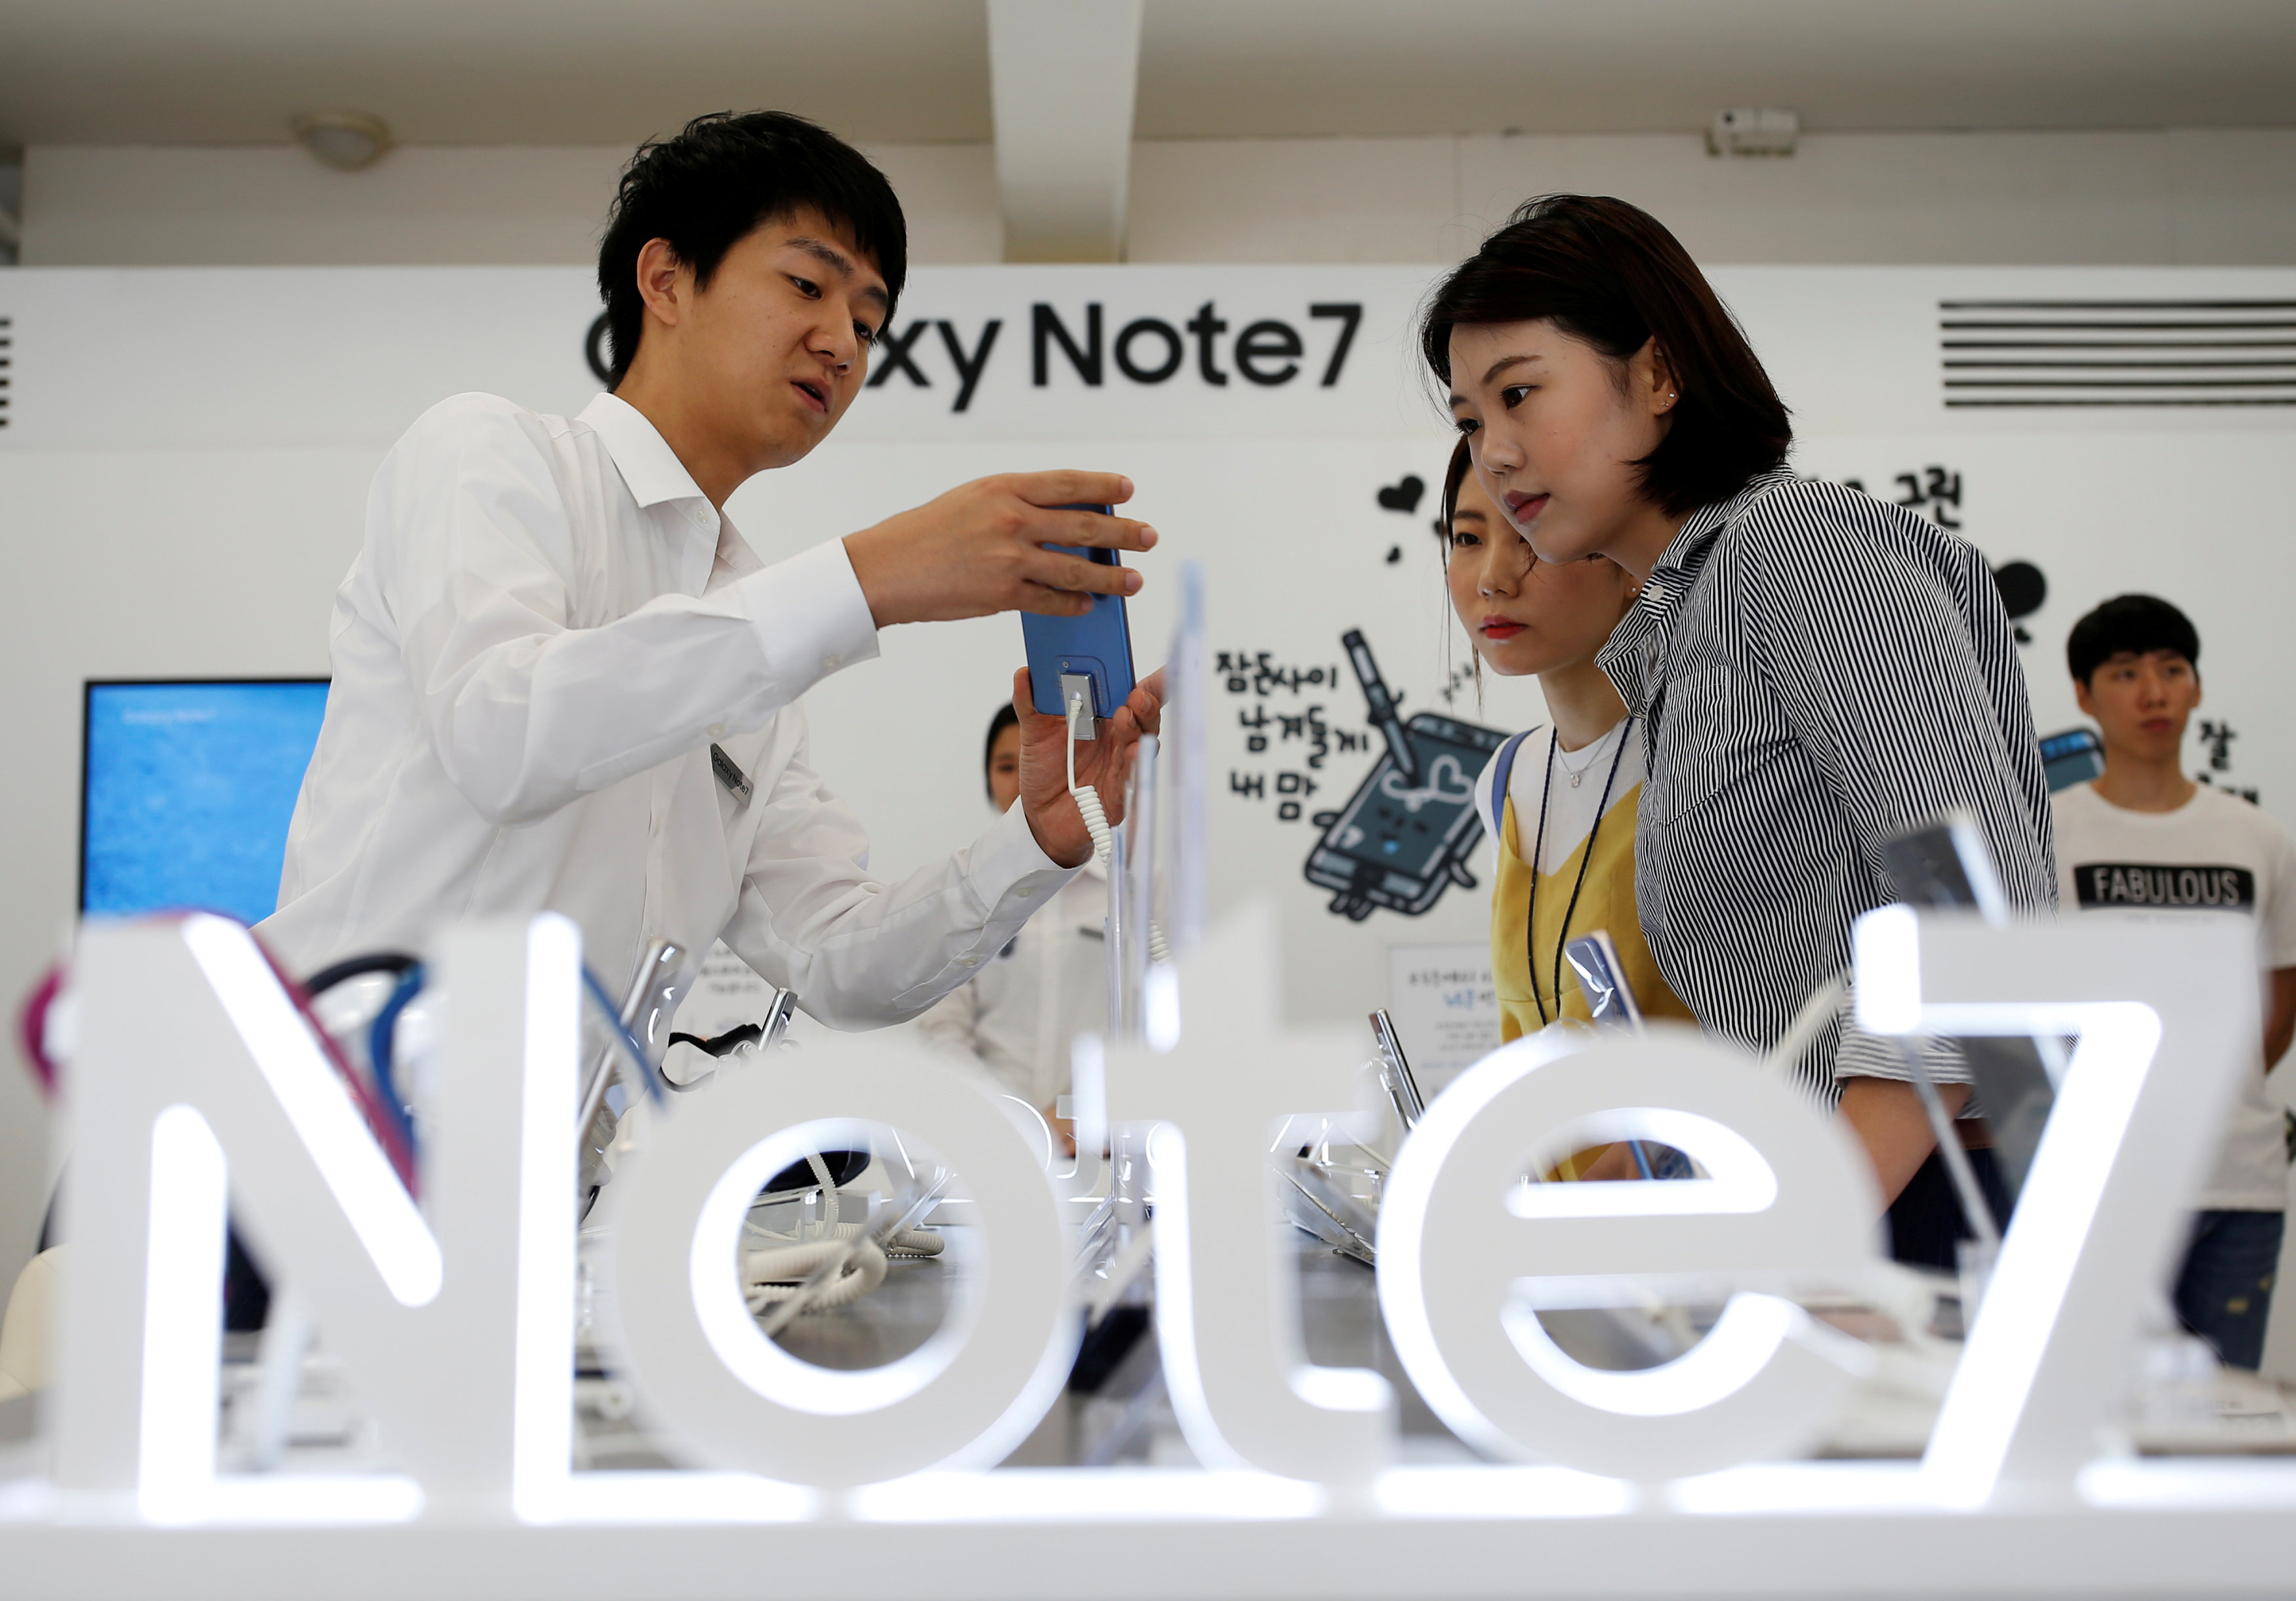 An employee helps customers purchase a Samsung Electronics' Galaxy Note 7 new smartphone at its store in Seoul, South Korea, September 2, 2016. REUTERS/Kim Hong-Ji/File Photon